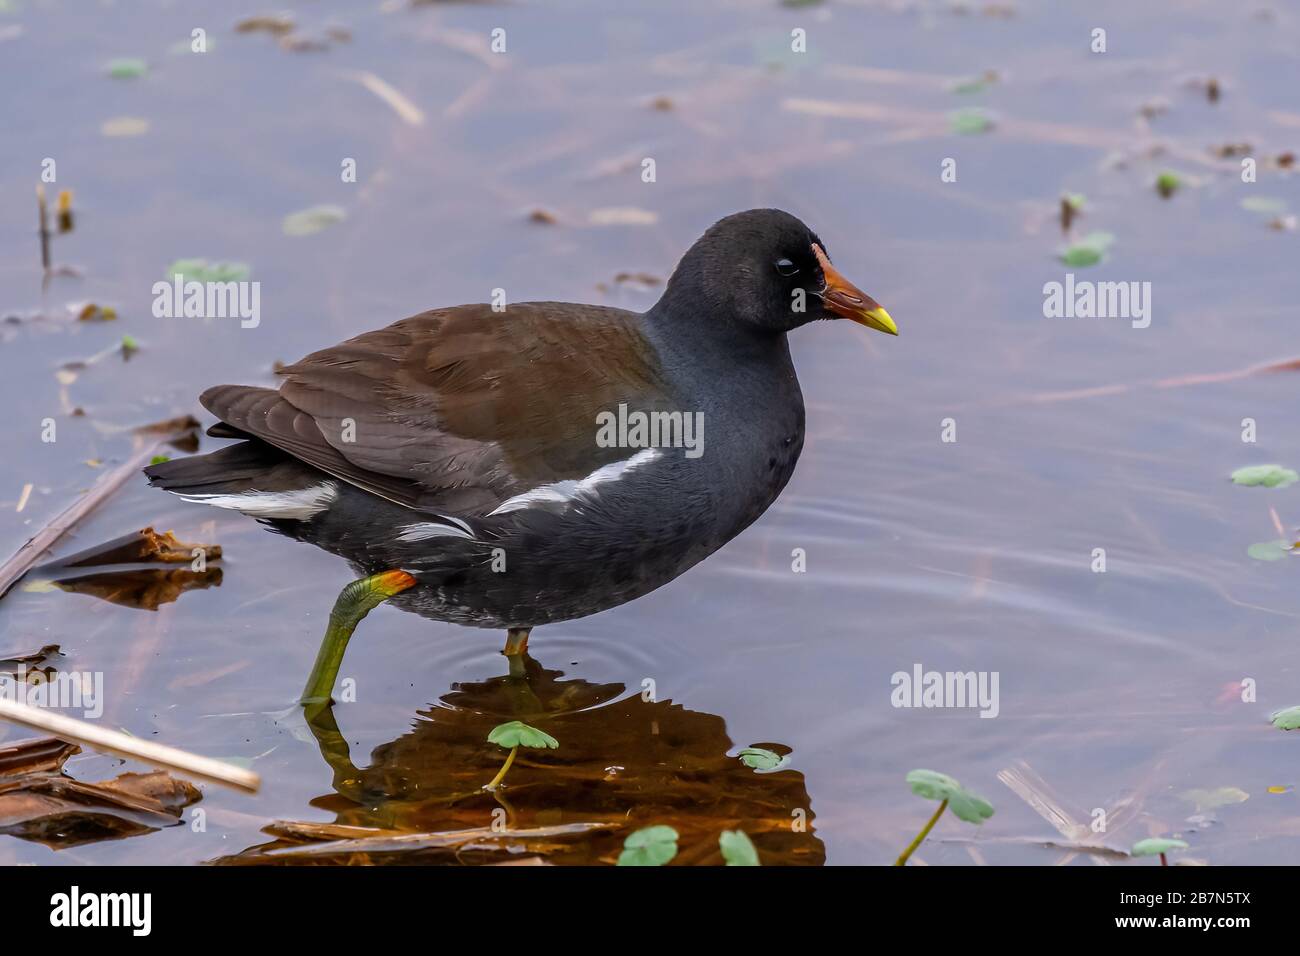 A Common Gallinule (Gallinula galeata) wading in the waters of the Savannah National Wildlife Refuge in Georgia, USA. Stock Photo